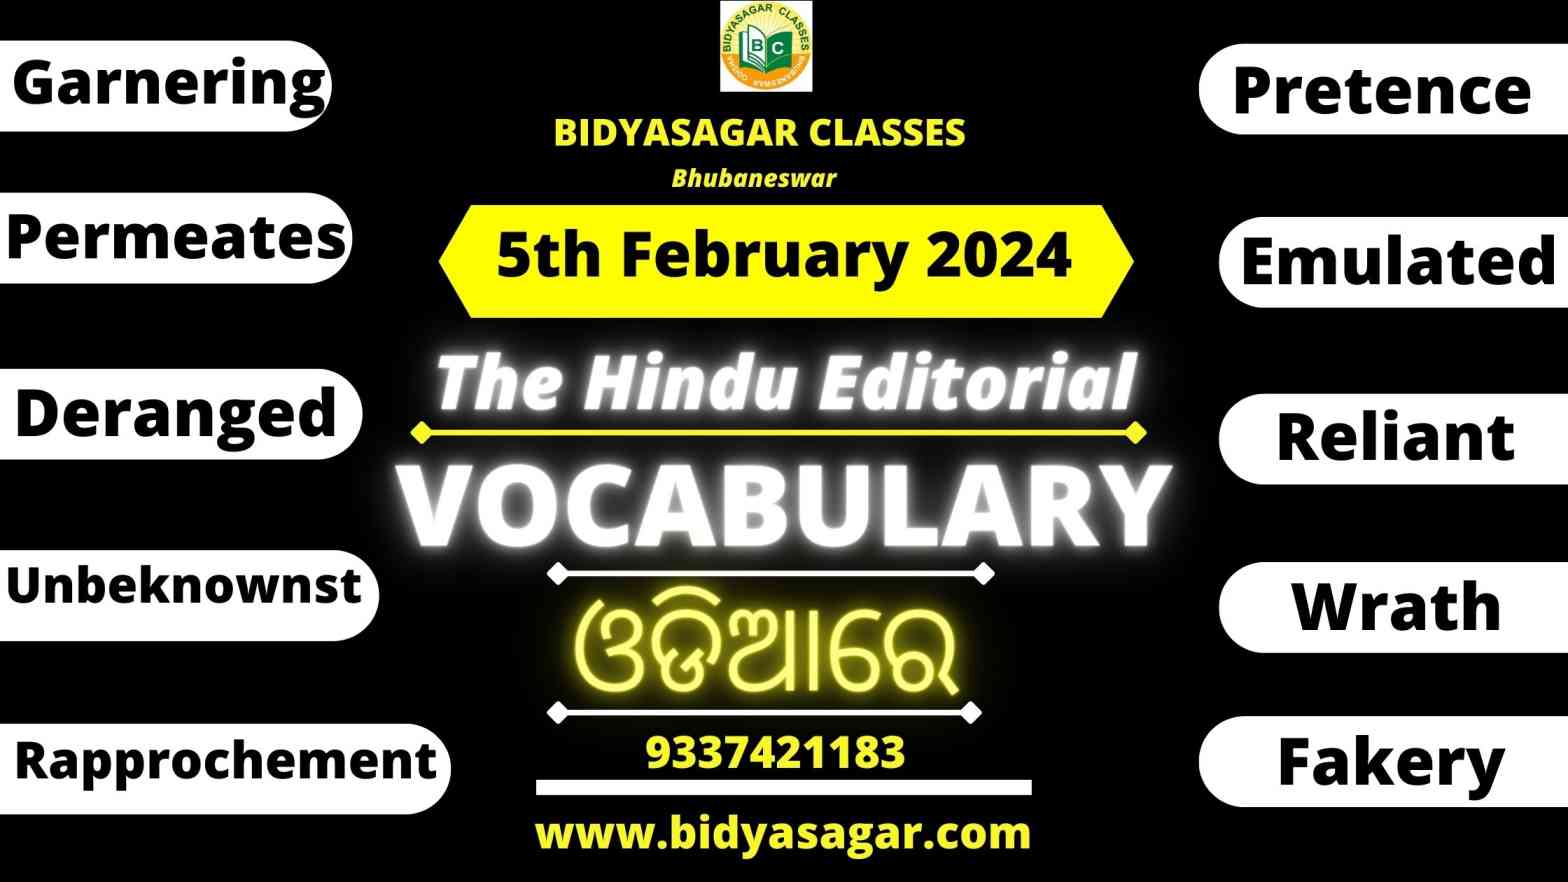 The Hindu Editorial Vocabulary of 5th February 2024